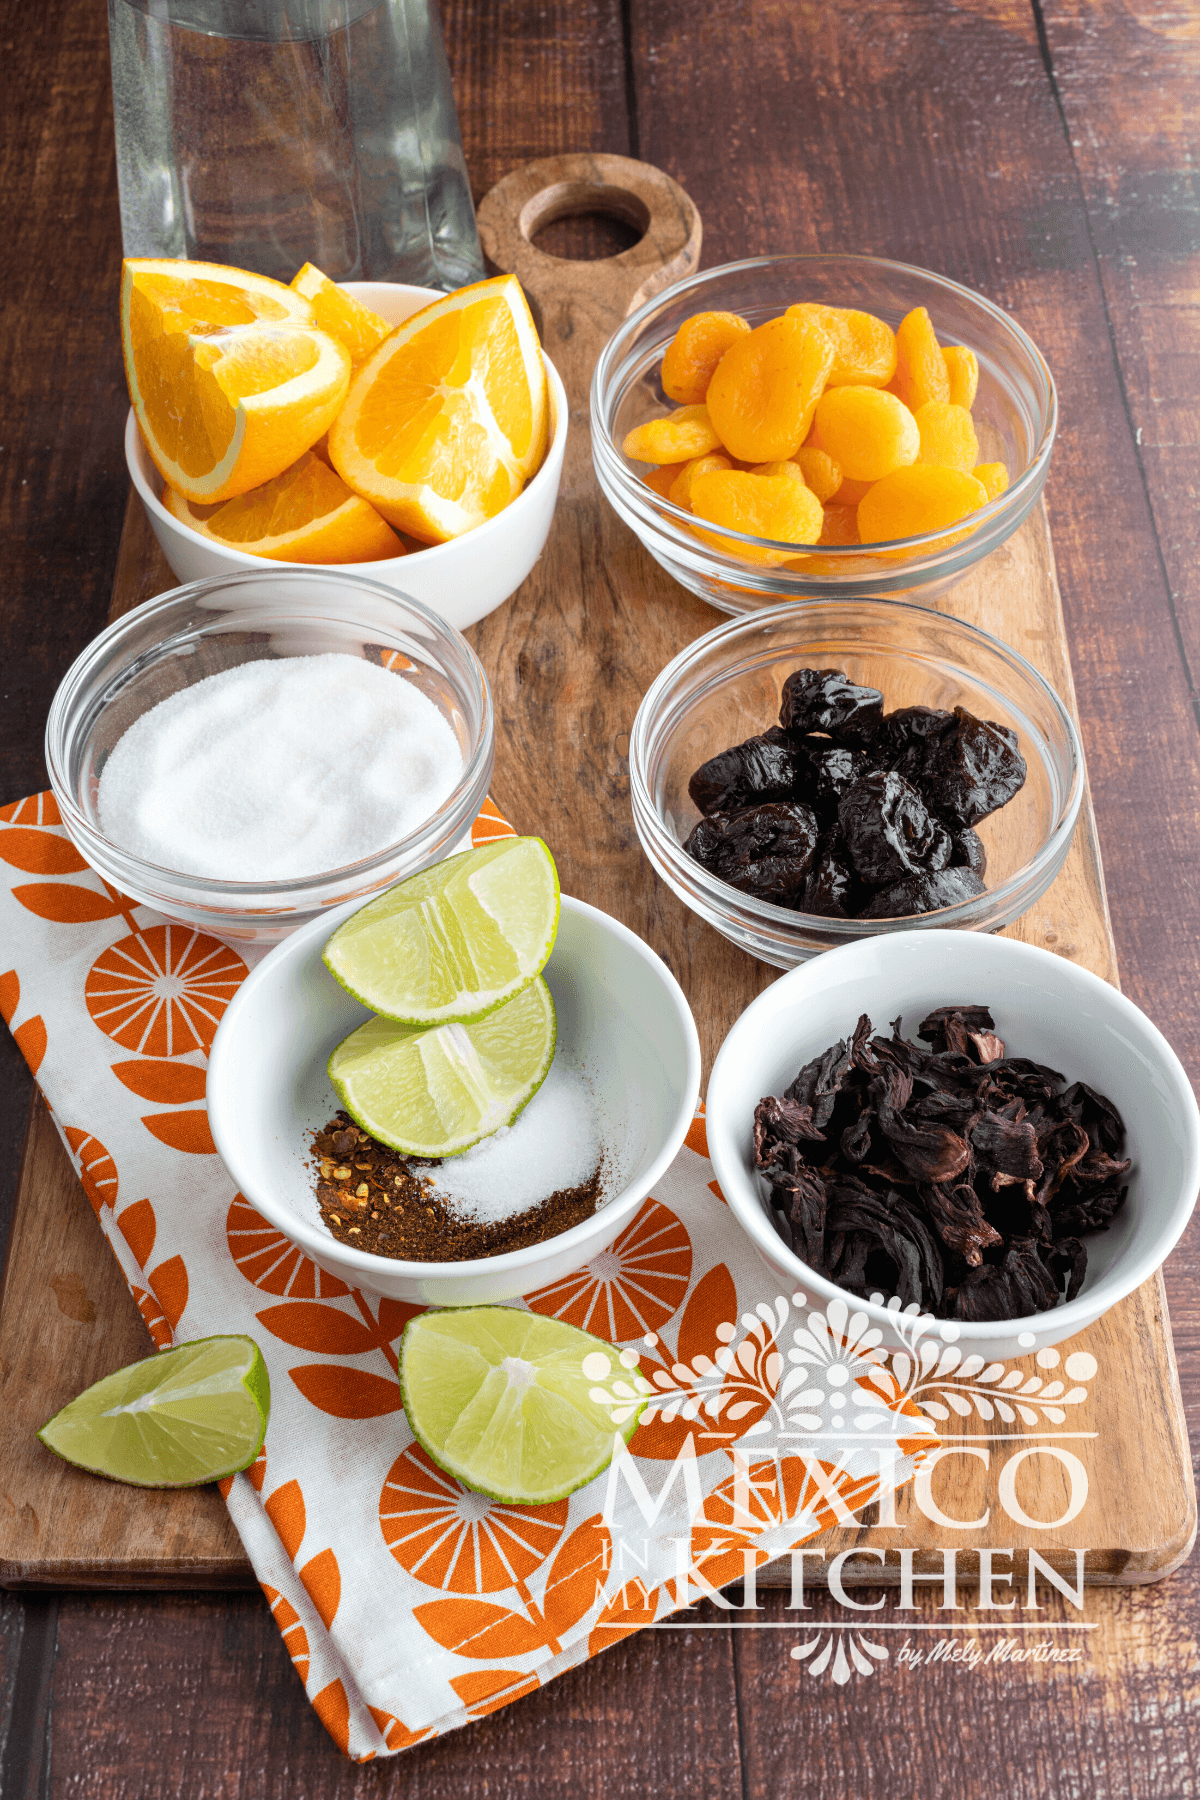 Ingredientes like oranges, dried dates, dried apricots, hibiscus flowers, limes, sugar and spices displayed in a table.